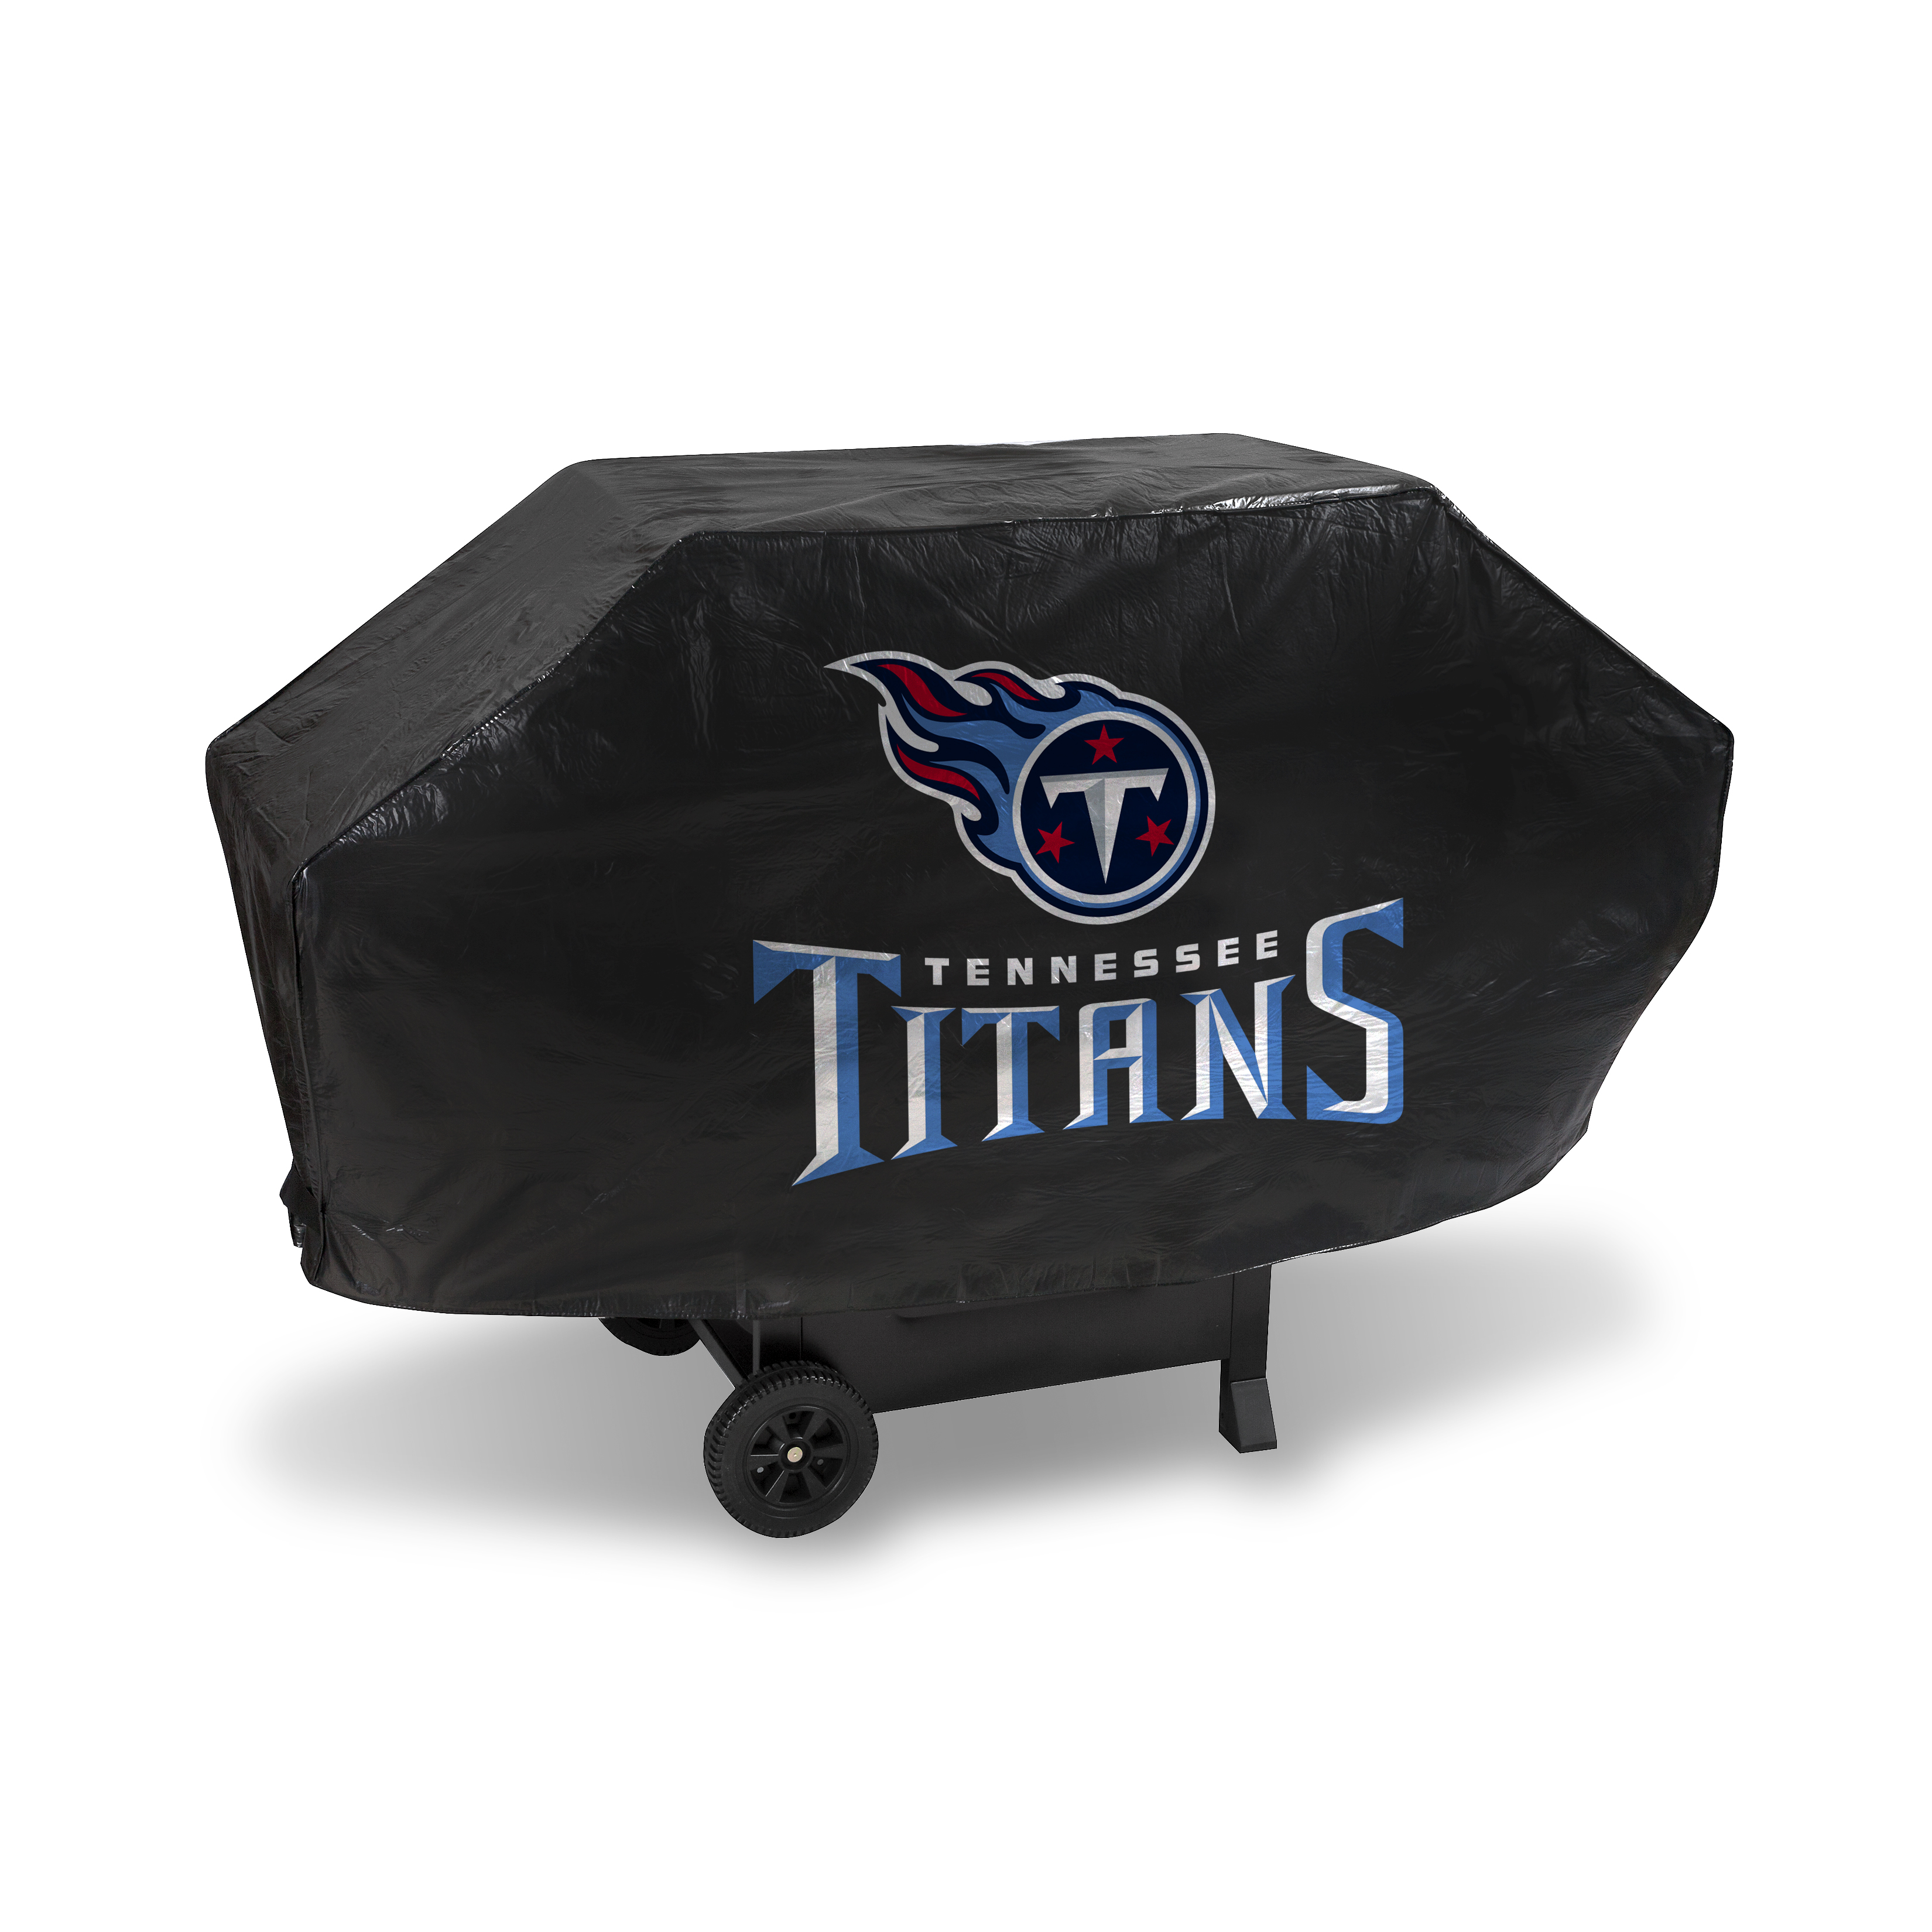 Rico Industries NFL Football Tennessee Titans  Deluxe Grill Cover